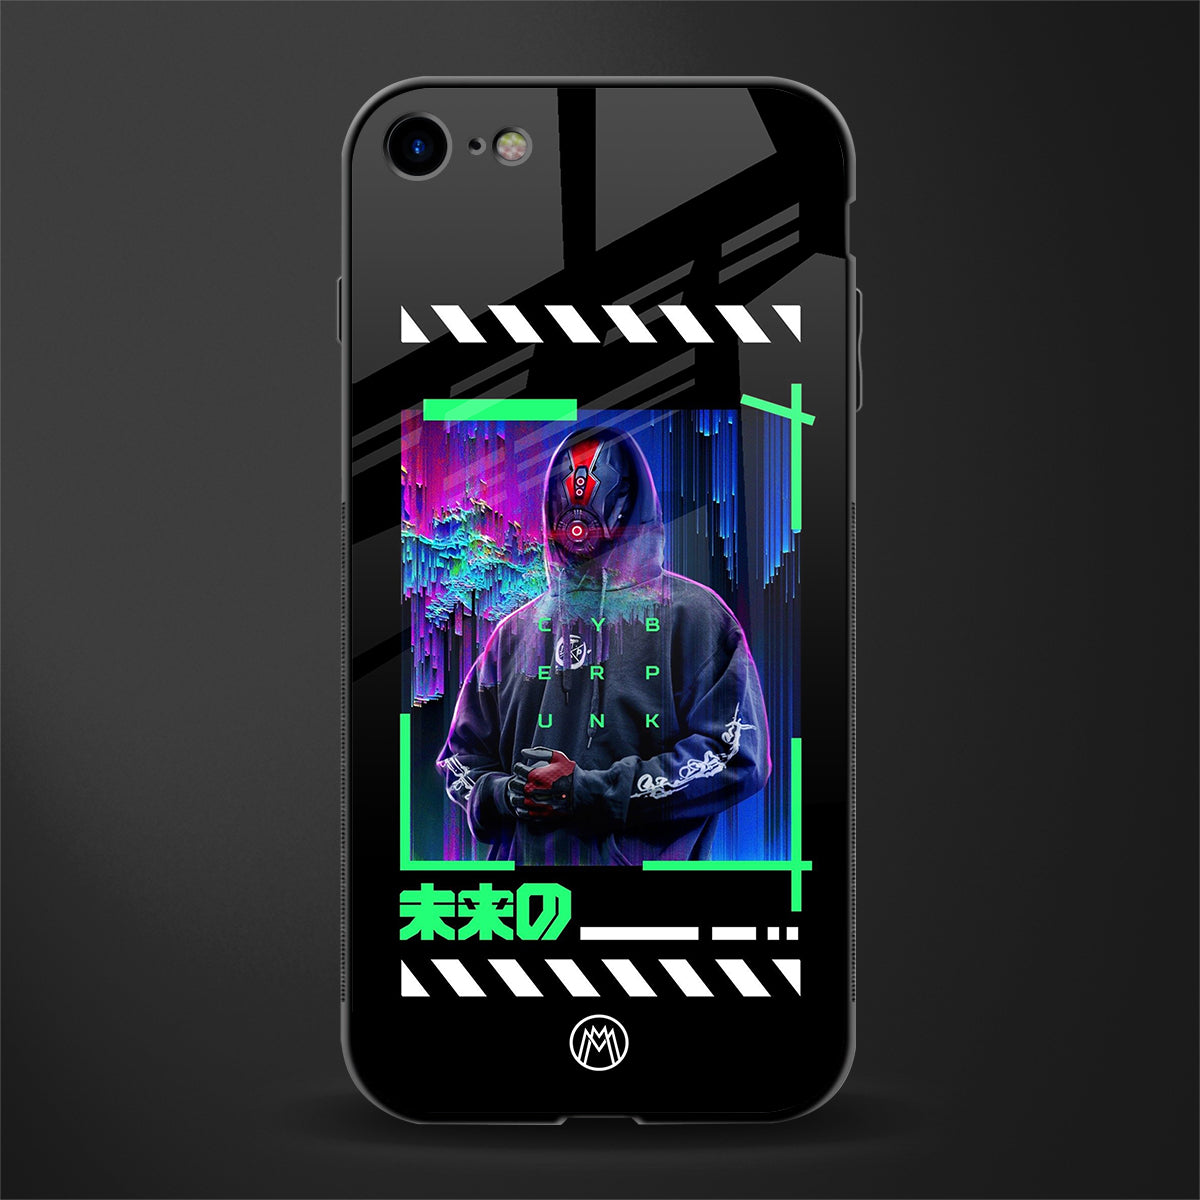 cyberpunk glass case for iphone 7 image